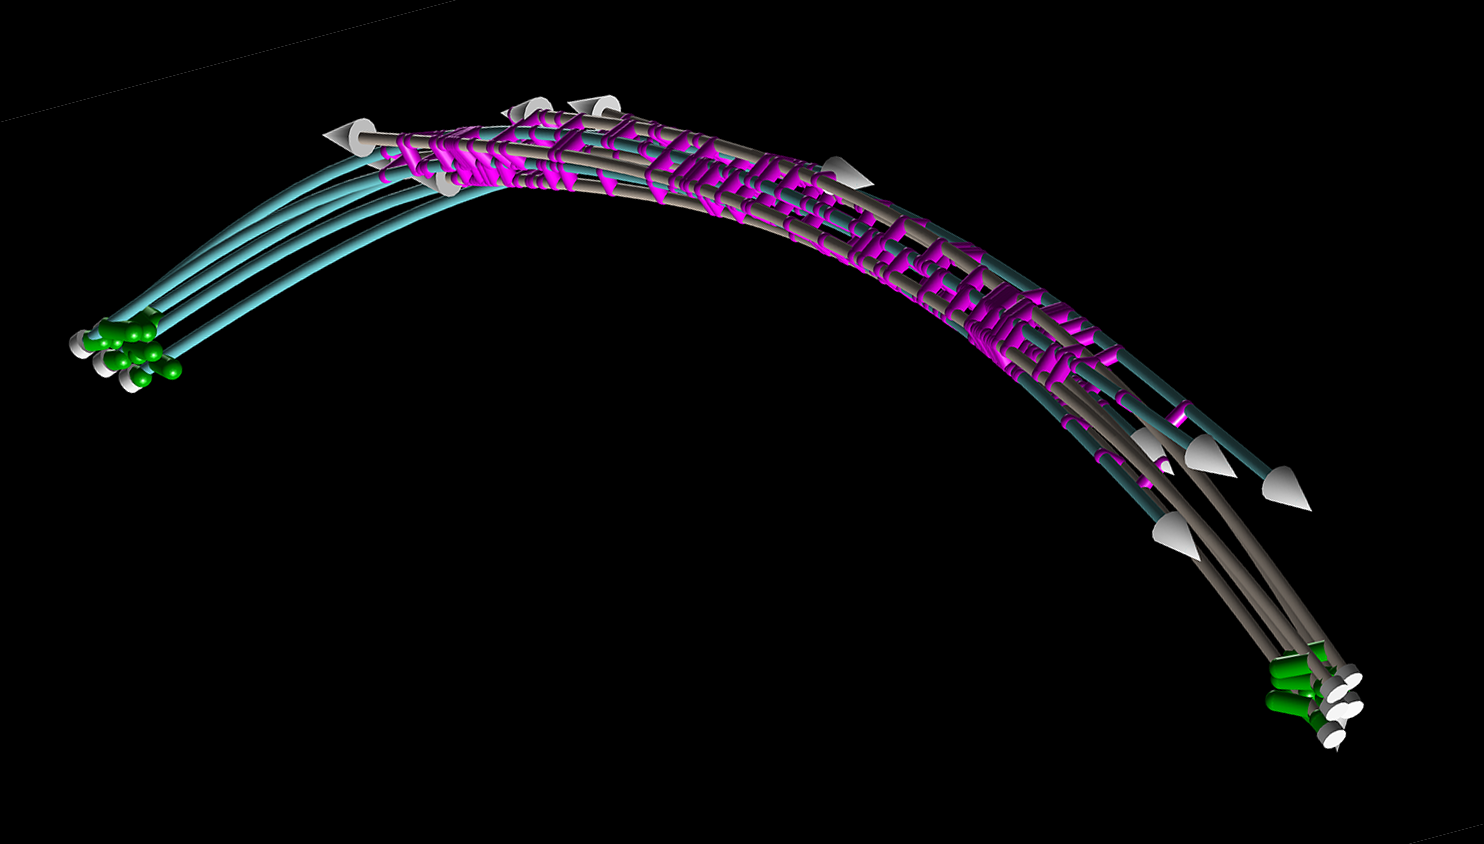 Simulated mitotic spindle with microtubules (white) and cross-linking proteins (purple). Copyright Francois Nedelec